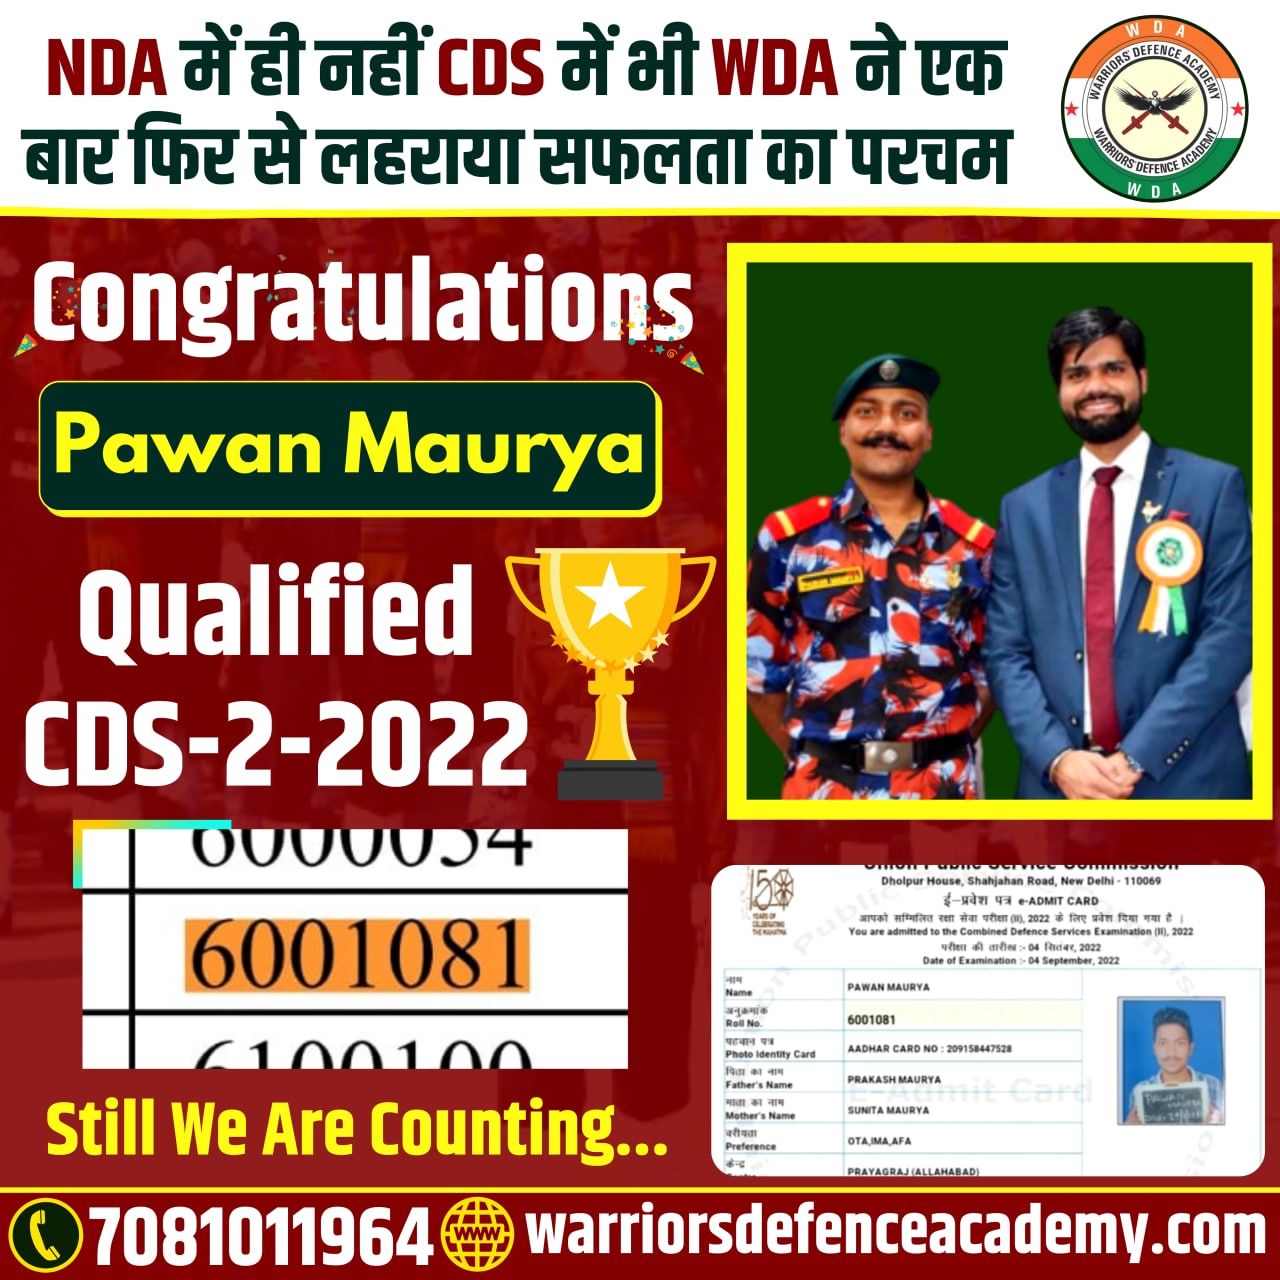 Best NDA Coaching in India After 12th | Warriors Defence Academy Best NDA Coaching in Lucknow